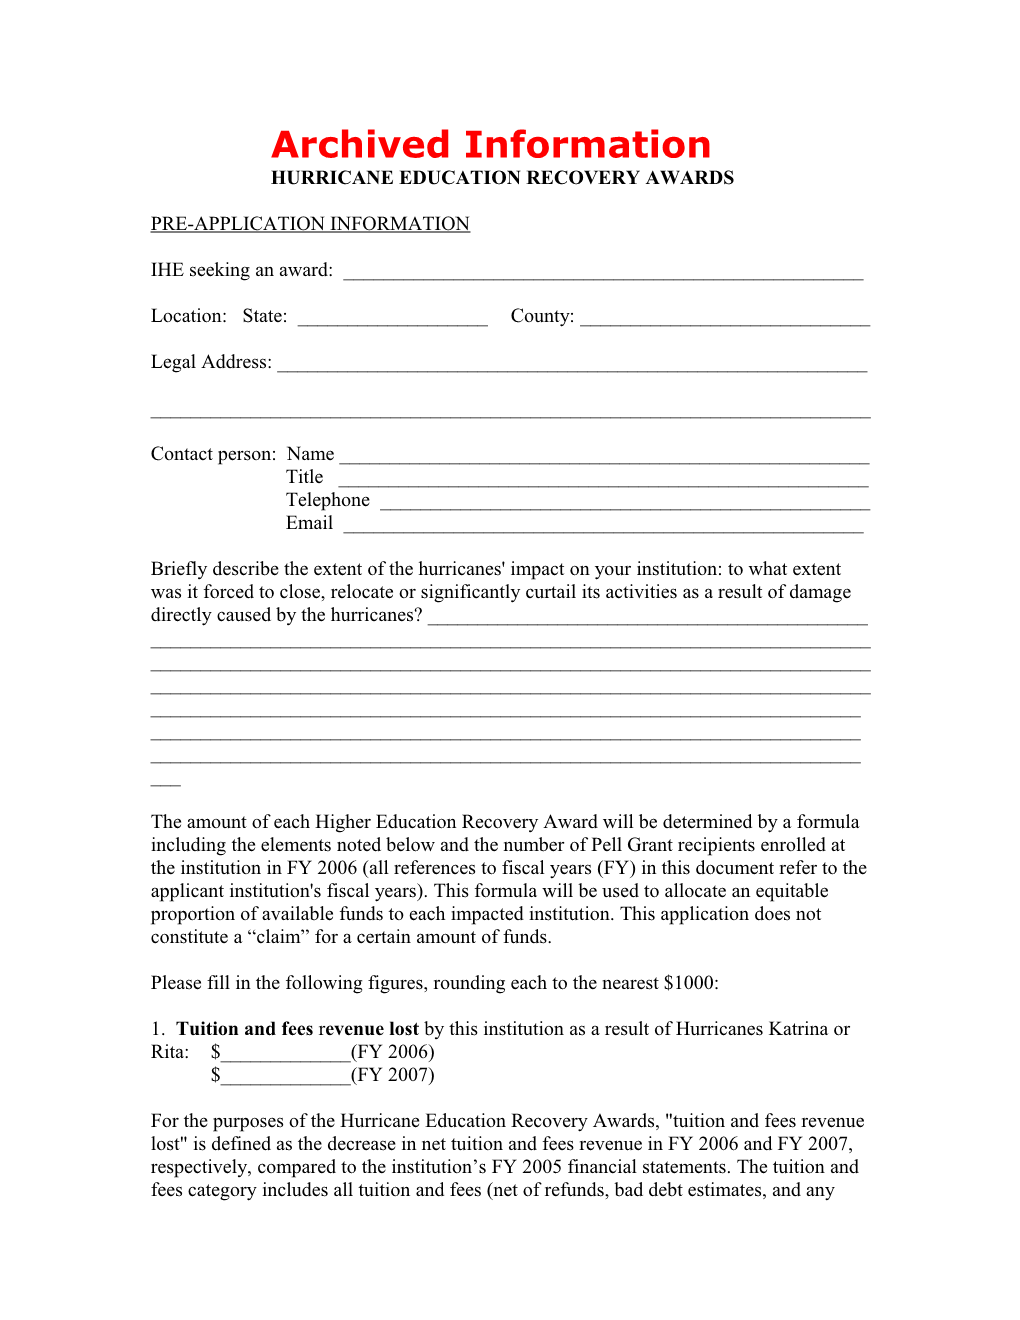 Archived: Hurricane Education Recovery Awards - 2007 Pre-Application Information (MS Word)